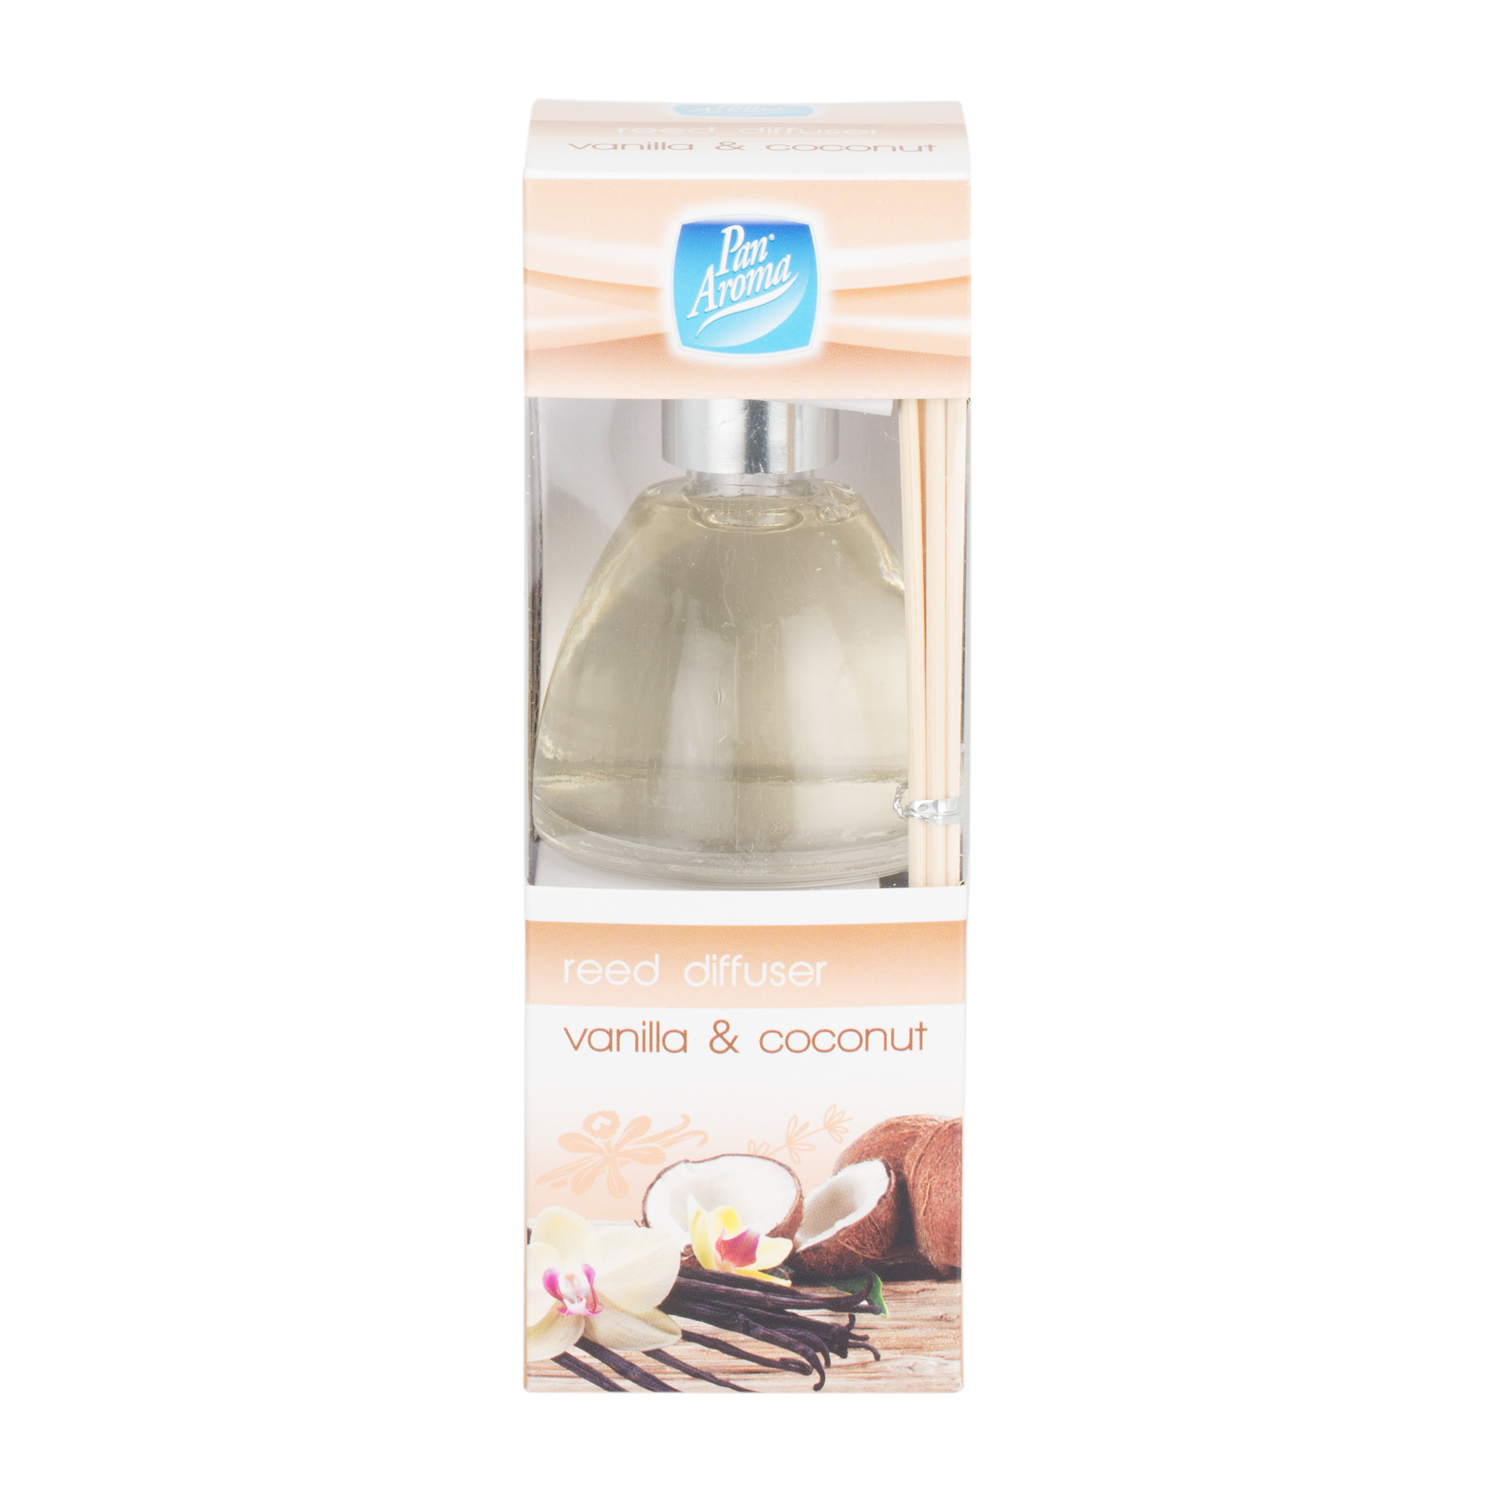 Pan Aroma Vanilla and Coconut Dome Reed Diffuser Image 1